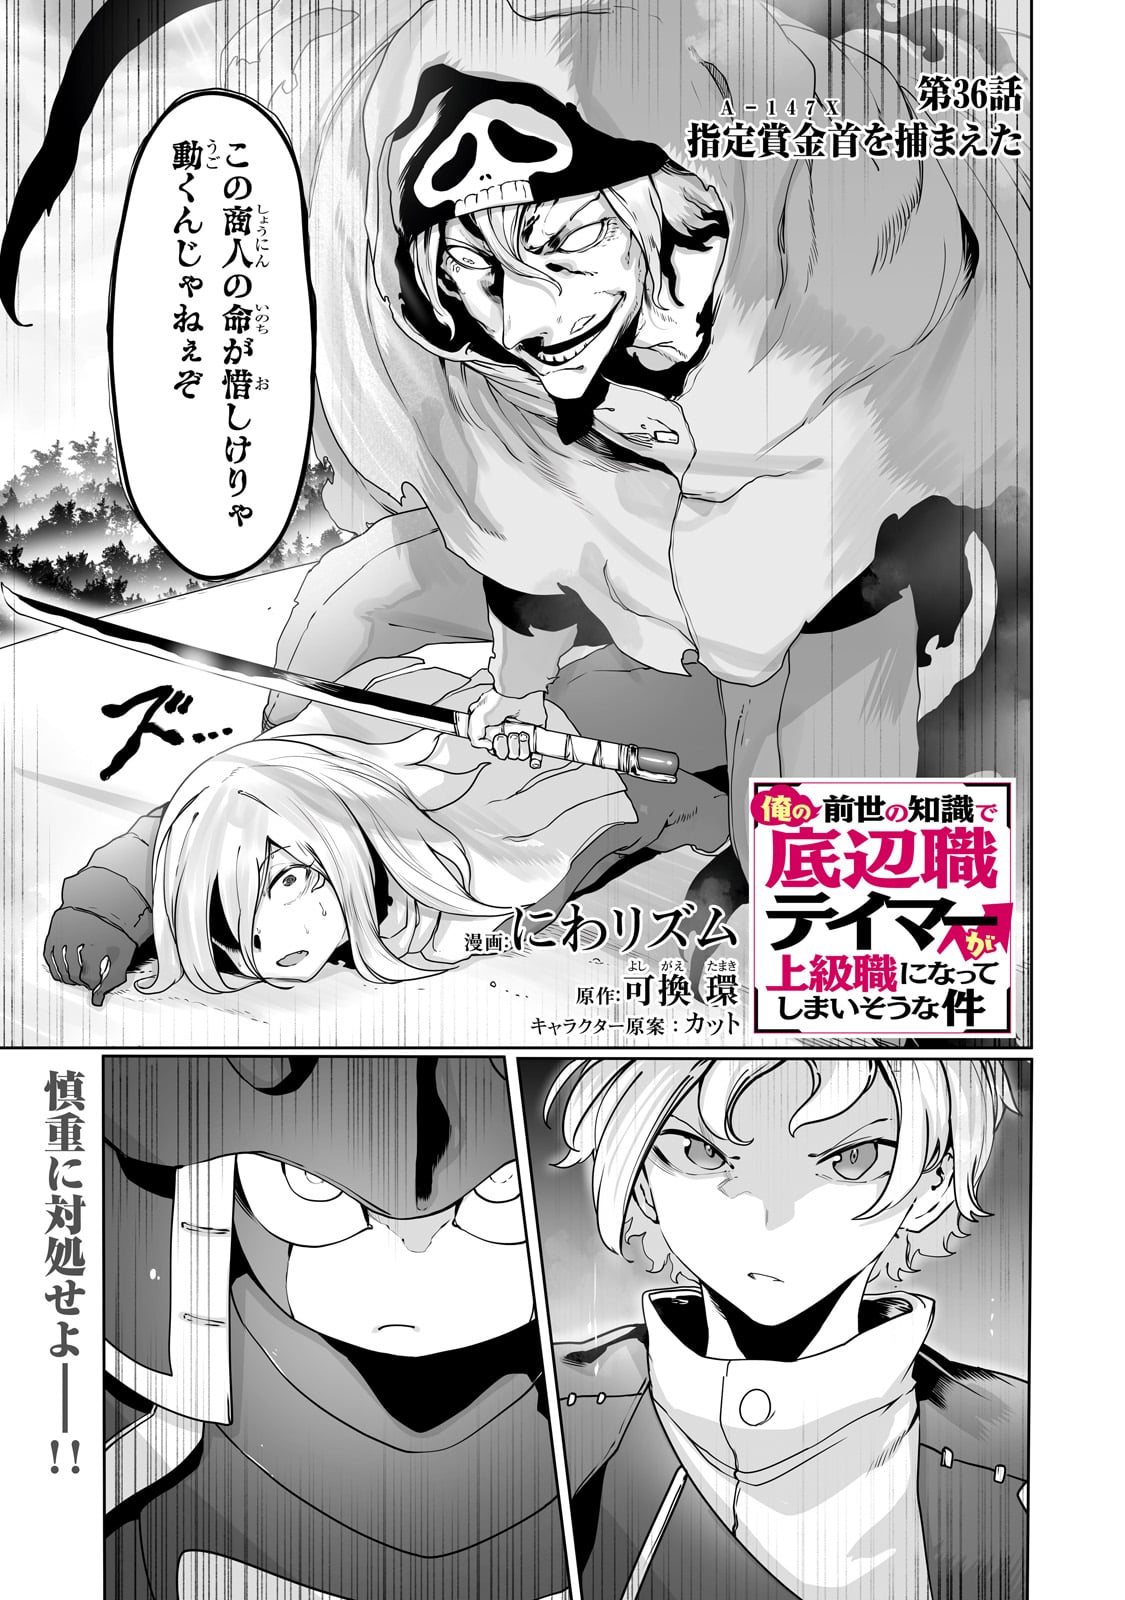 The Useless Tamer Will Turn Into the Top Unconsciously by My Previous Life Knowledge - Chapter 36 - Page 1